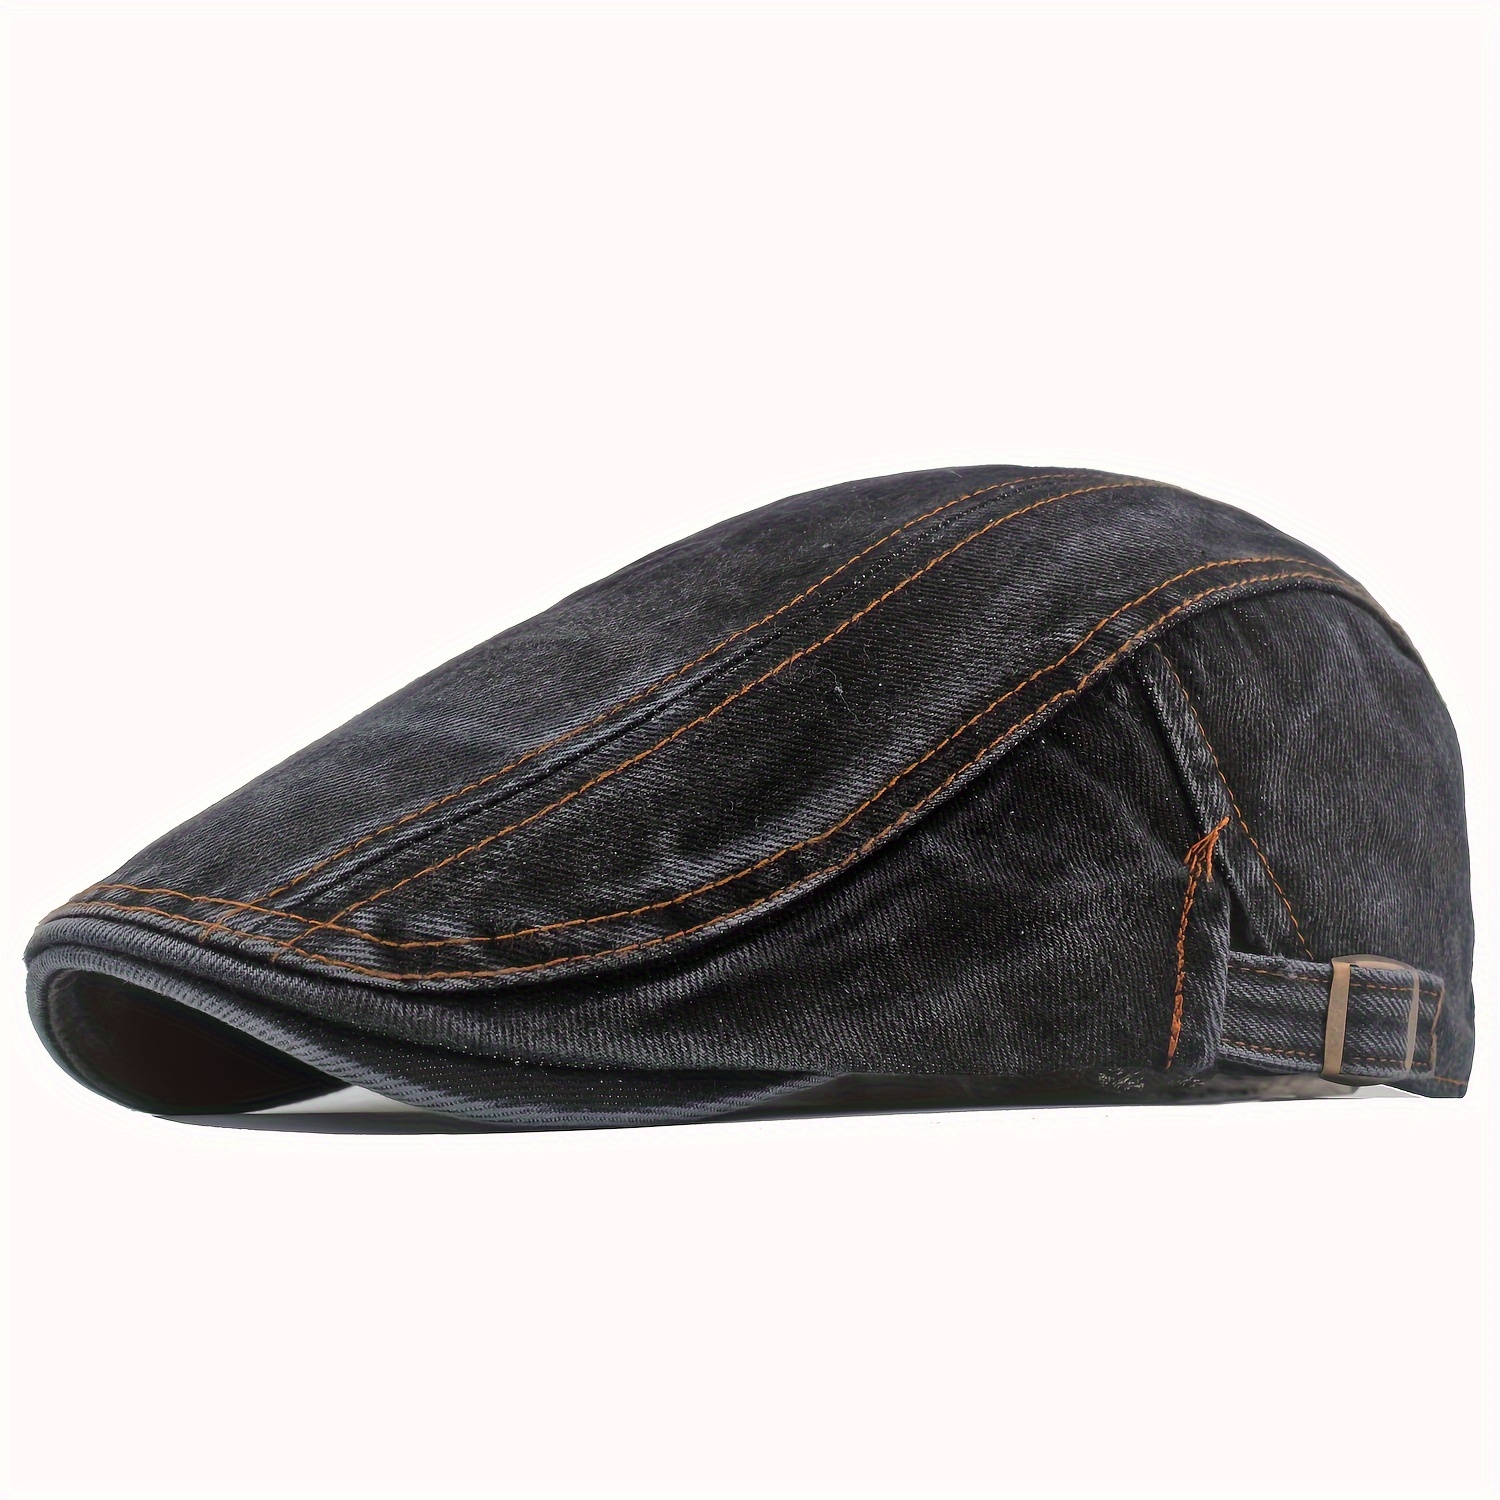 

Washed Denim Newsboy Cap For Men - Adjustable Flat Top Taxi Ivy Driving Hunting Hat With British Style Beret